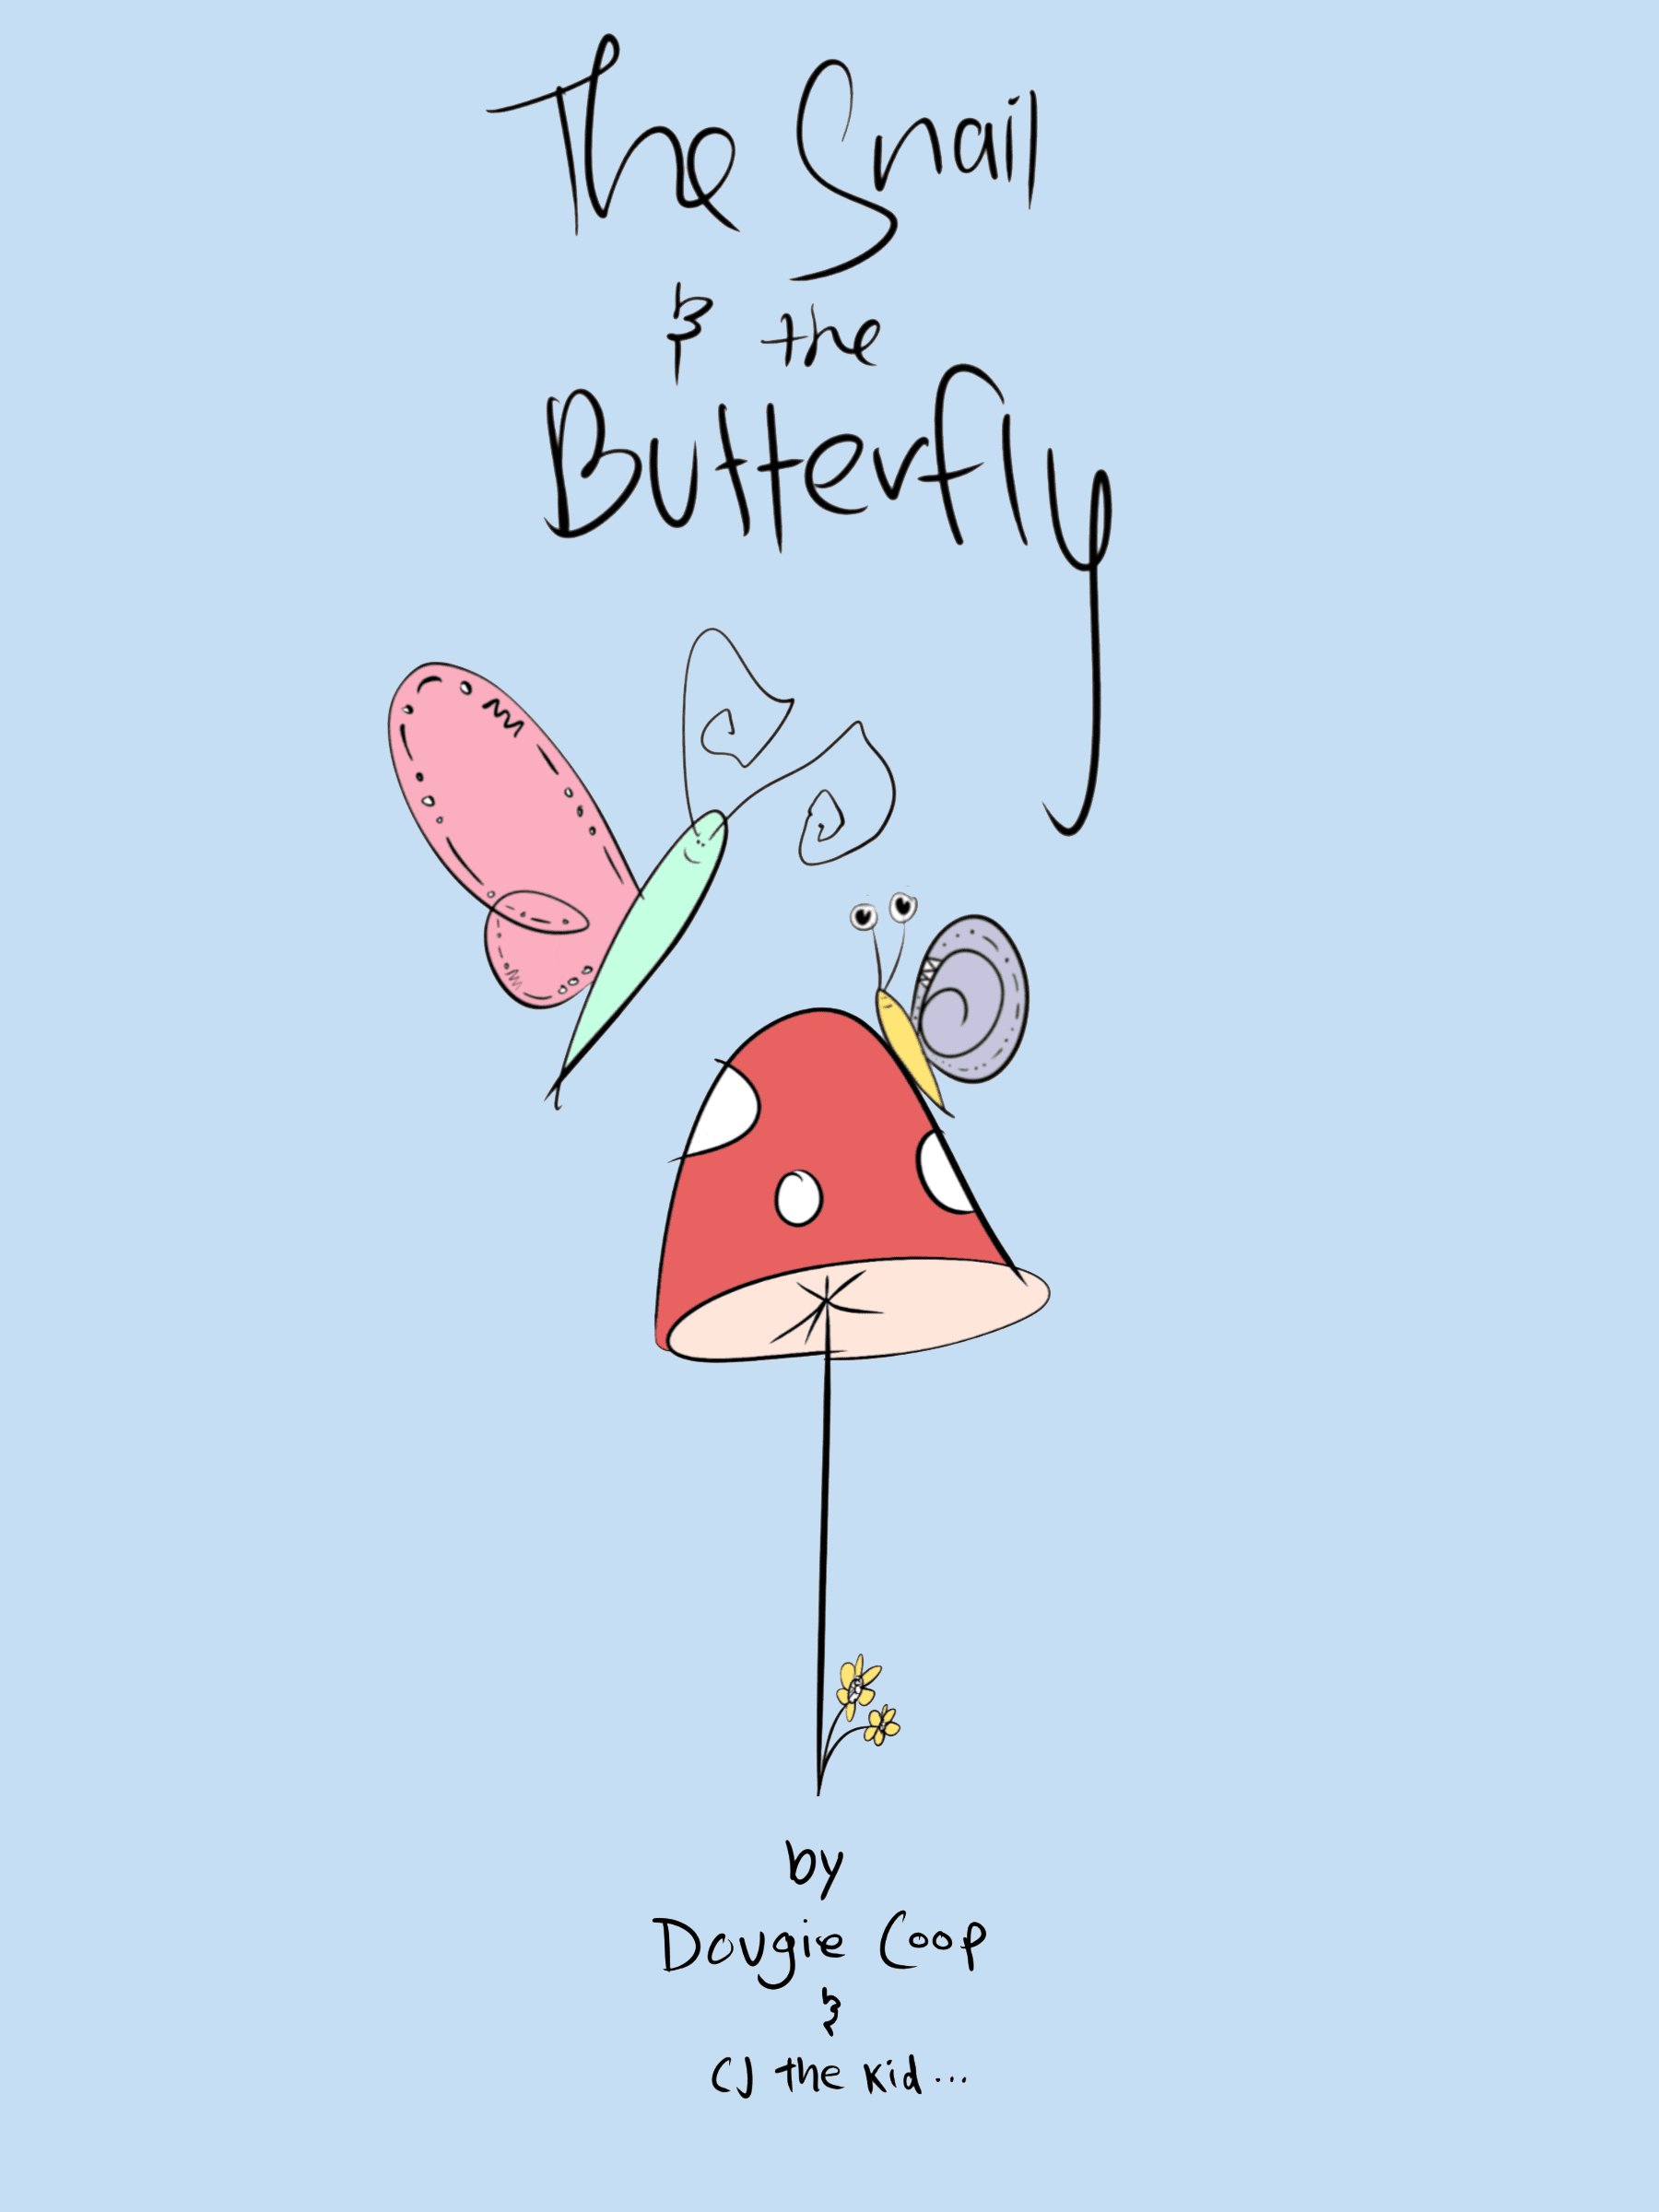 High Res 300 DPI 1800x2400 Cover Image of The Snail & The Butterfly by Dougie Coop & CJ the Kid